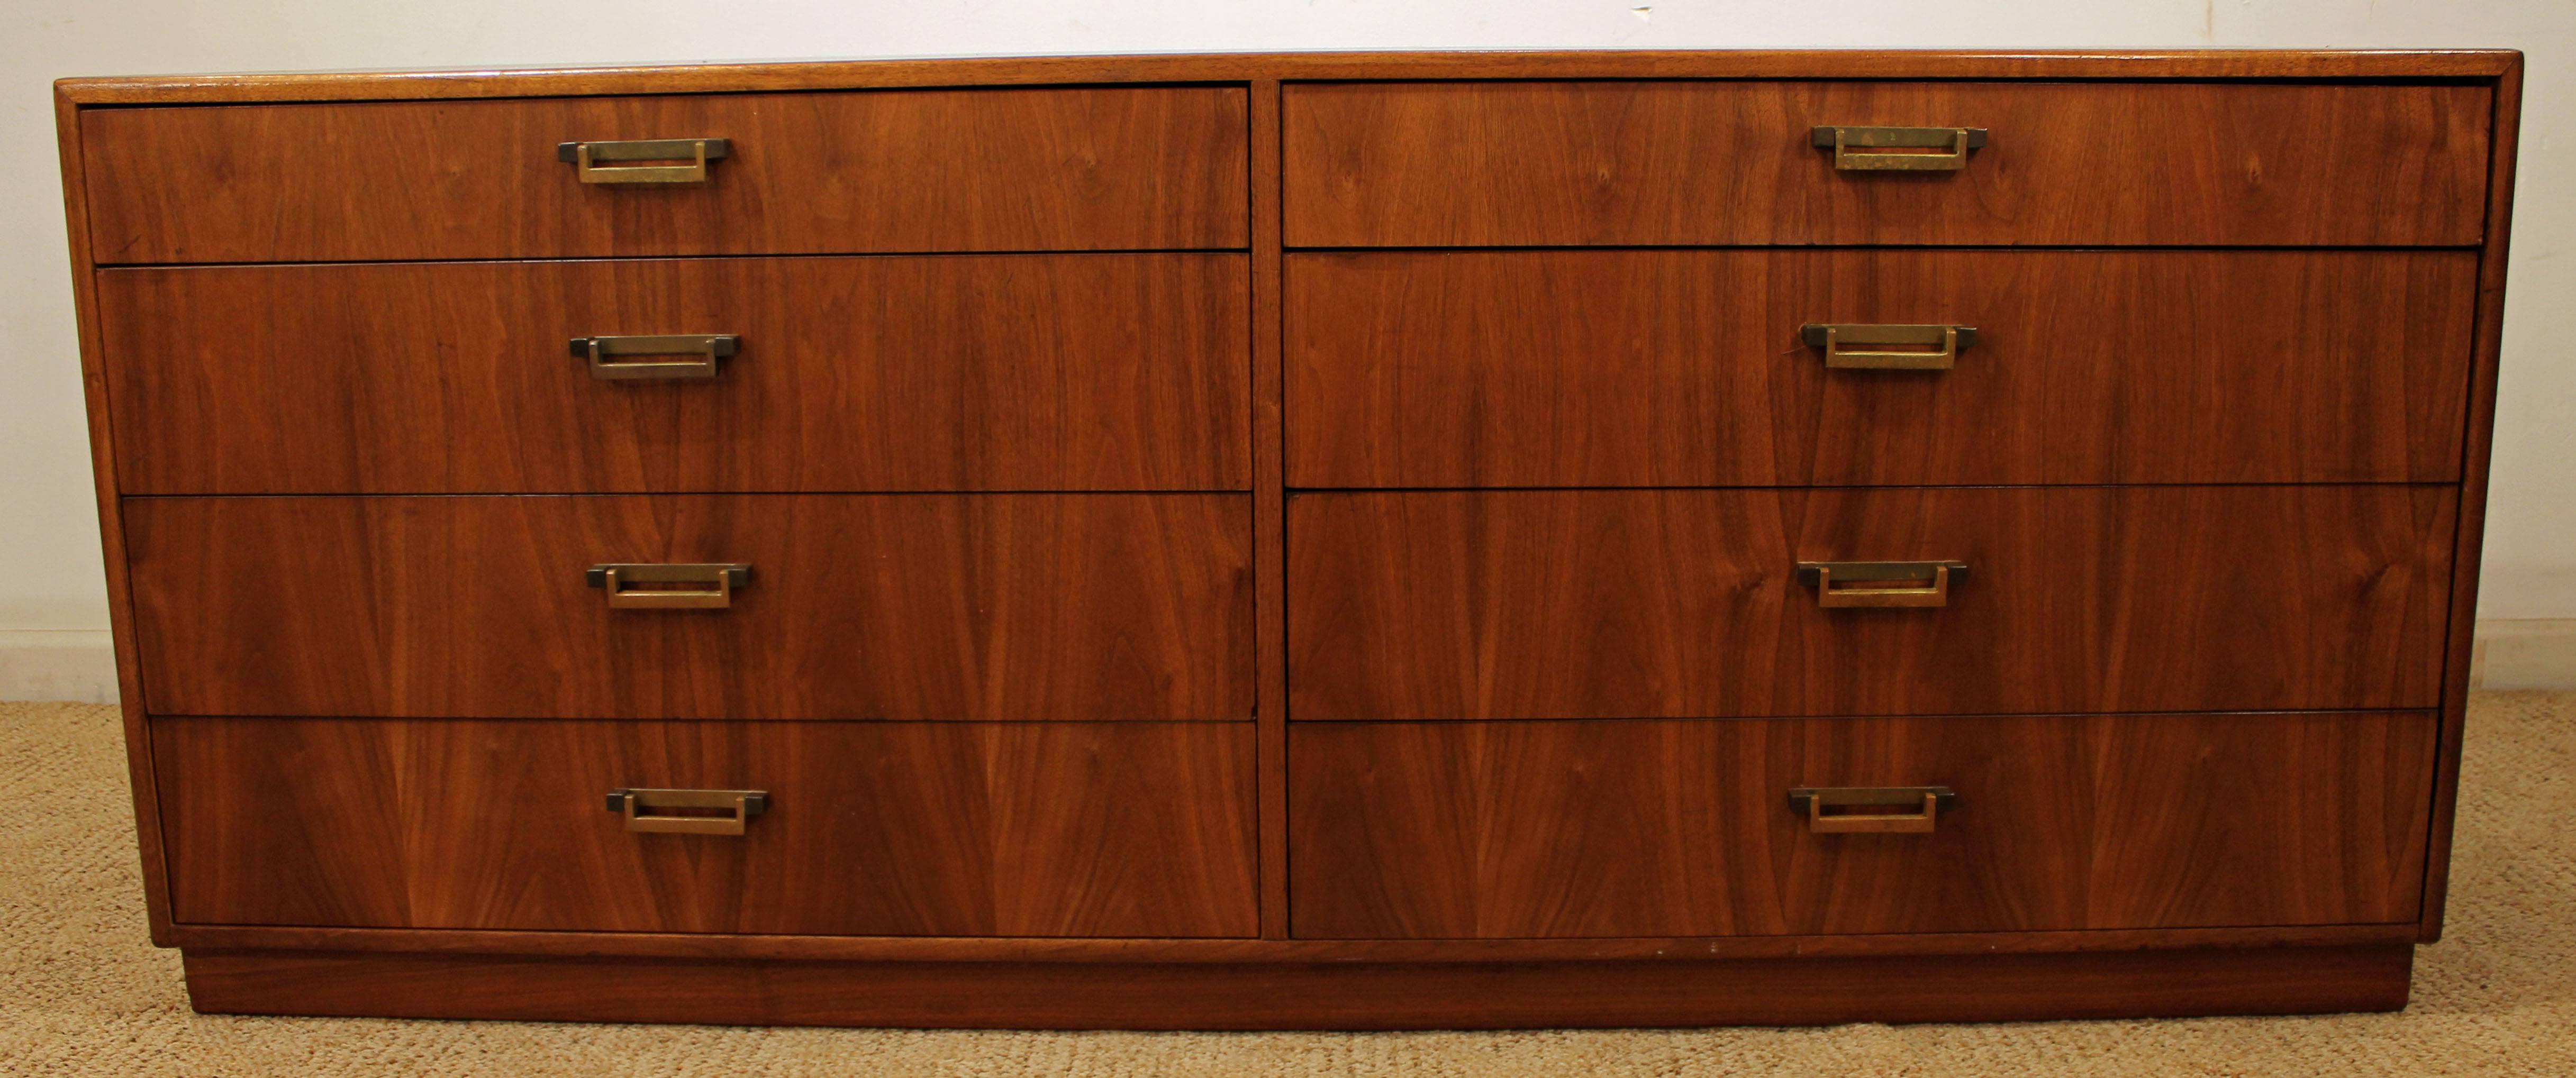 Offered is a Mid-Century Modern credenza made for Founders. It is made of walnut and a burl wood-face with brass pulls. Includes eight dove tailed drawers. We believe it was designed by Milo Baughman, but do not have documentation. Has been